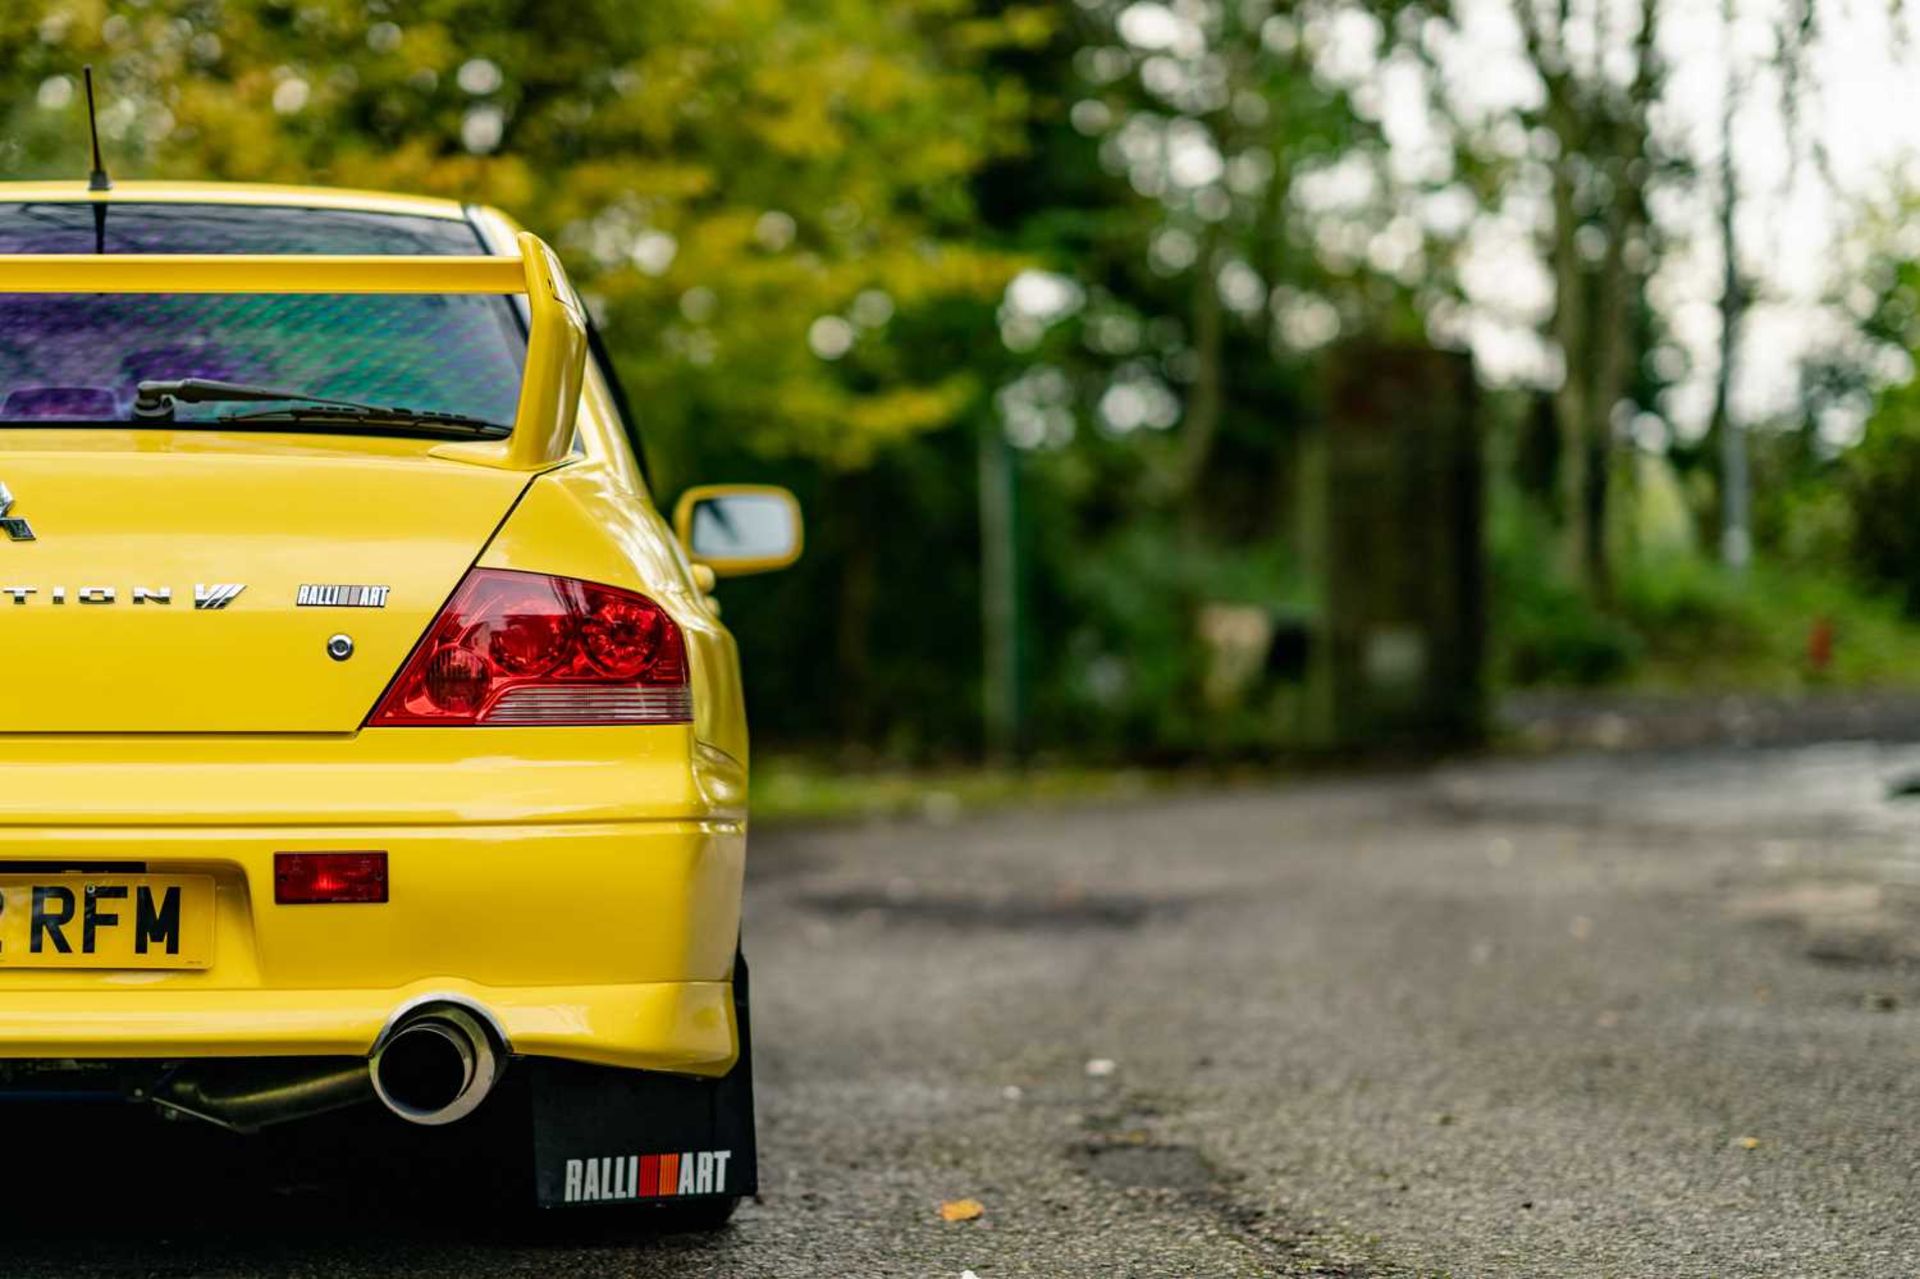 2001 Mitsubishi Lancer Evolution VII Subtly upgraded and previous long-term (seventeen year) ownersh - Image 11 of 64